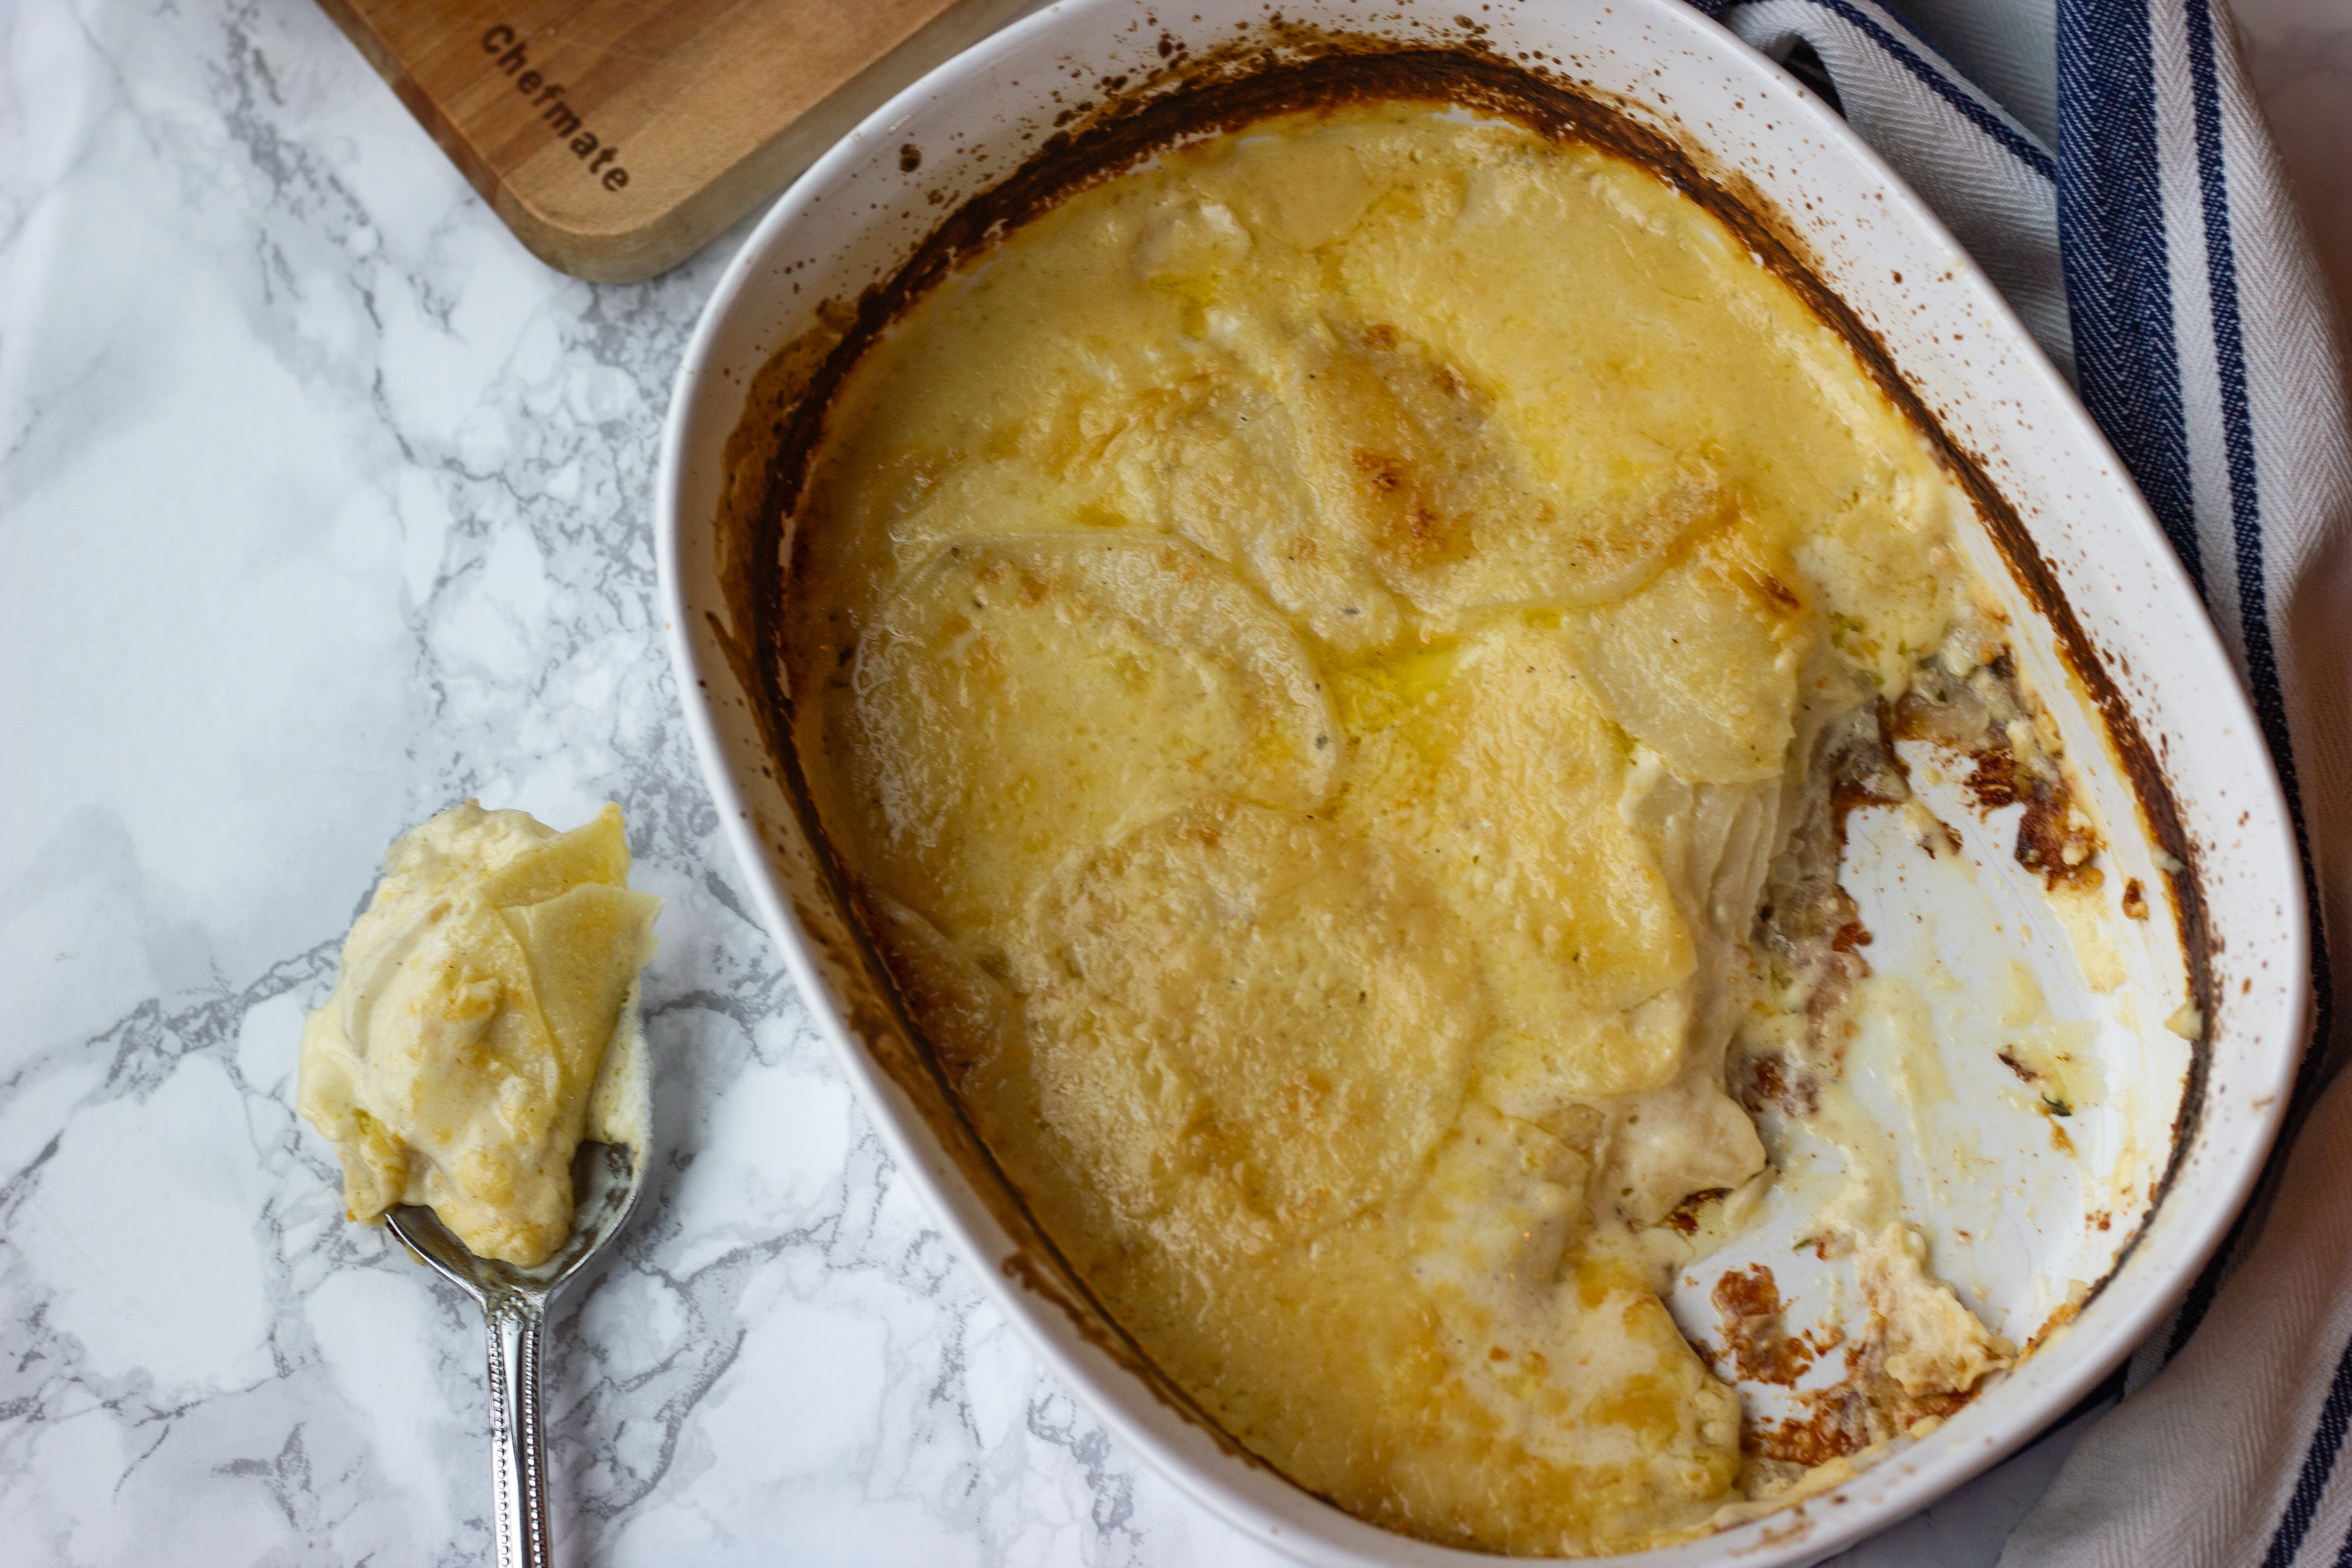 Keto turnip gratin is a keto swap for potatoes. Thin slices of turnips are baked in a rich cheese sauce until tender in this keto side dish. 